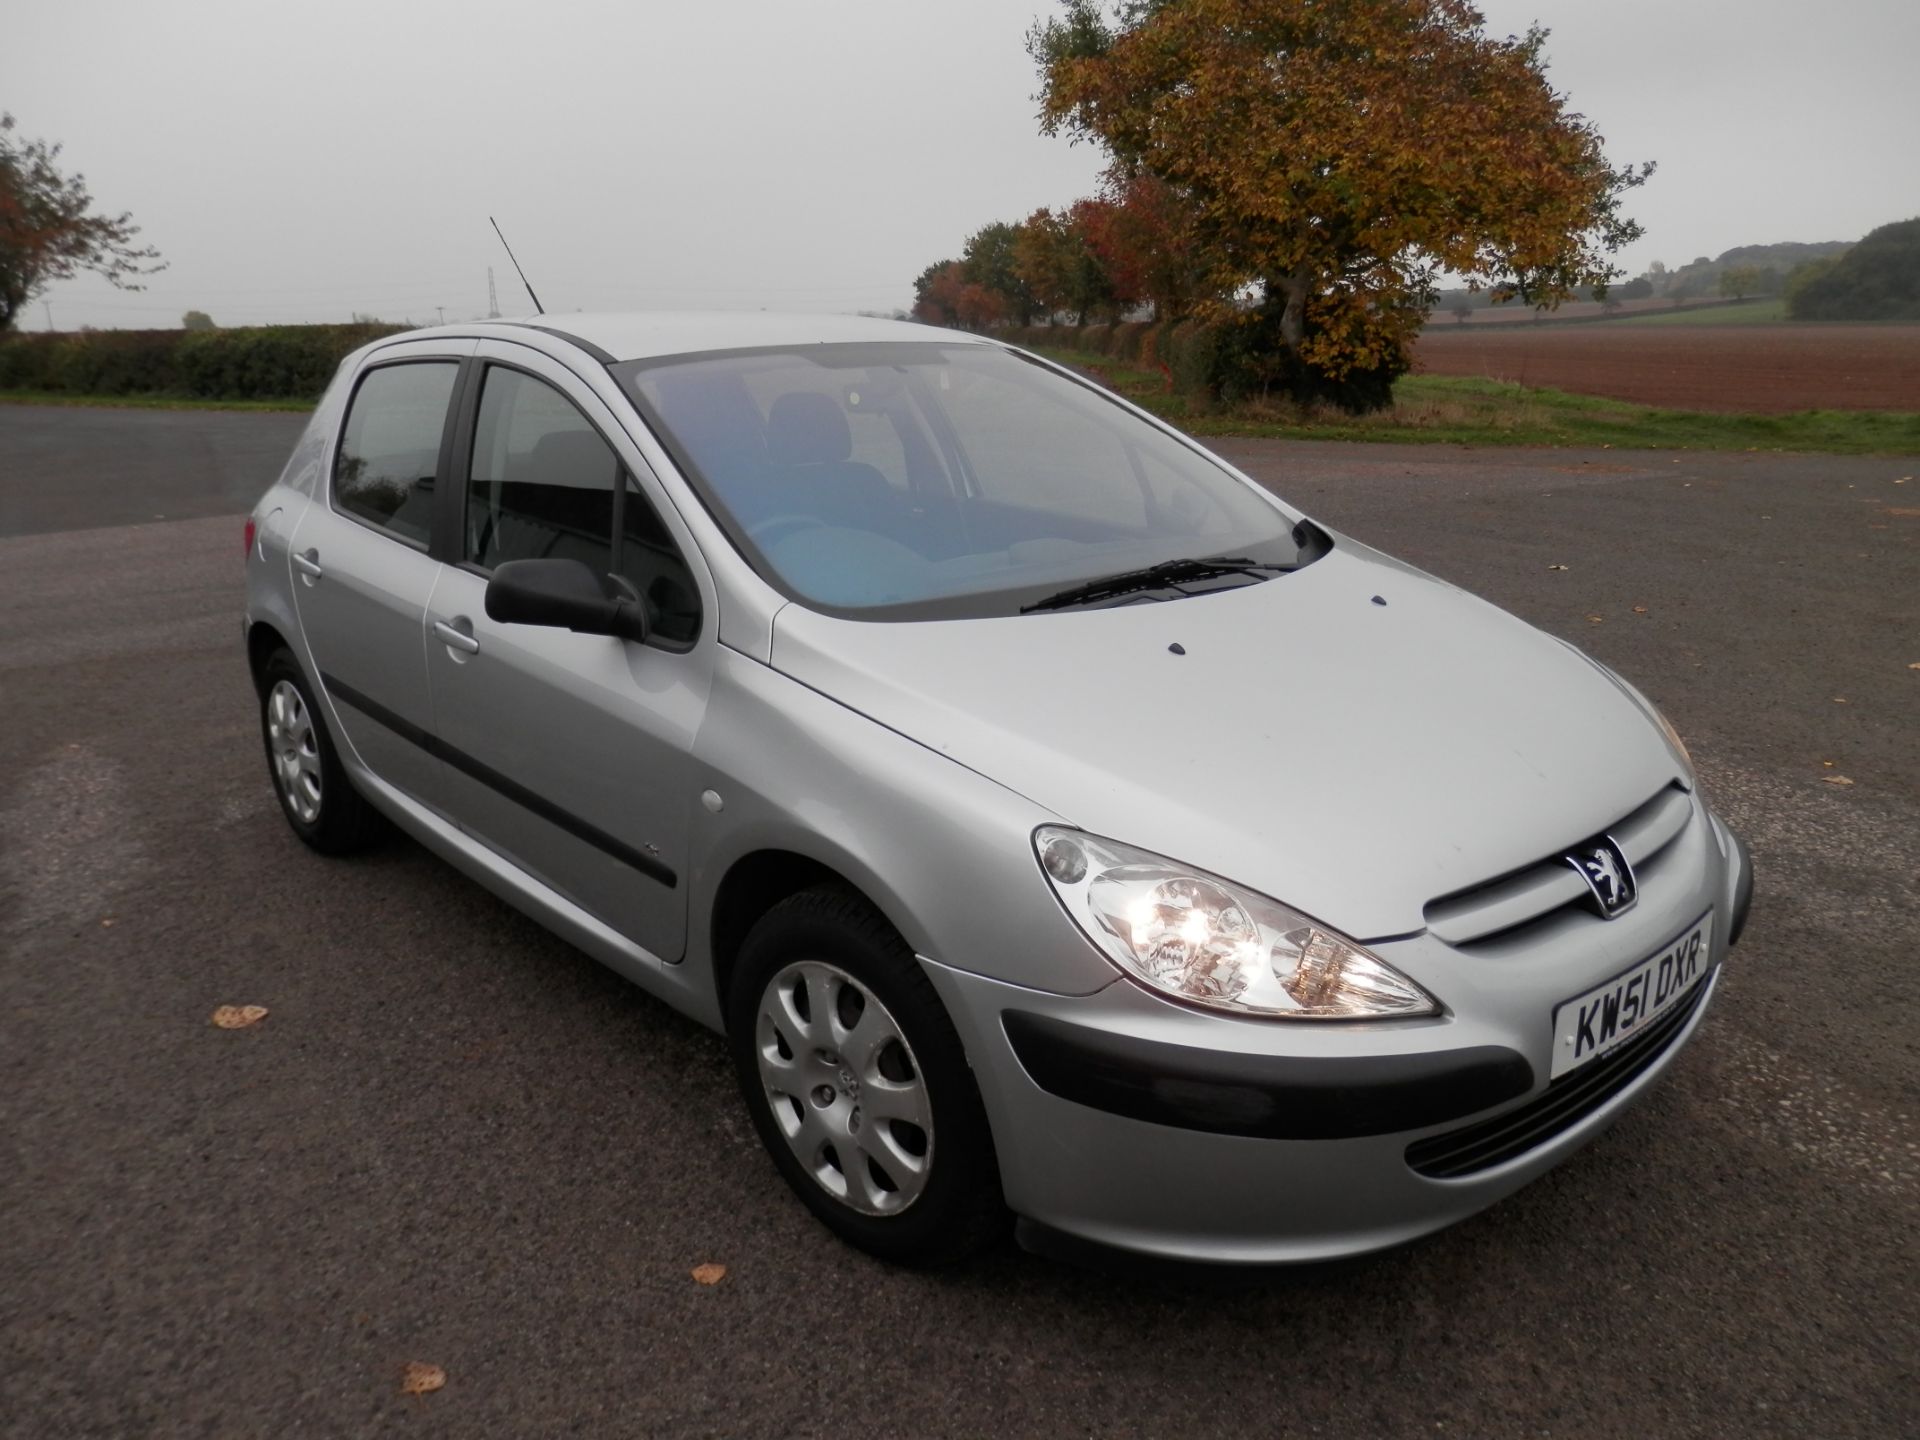 2002/51 PLATE PEUGEOT 307 1.6 LX AUTOMATIC, ONLY 51K WARRANTED MILES & MOT MAY 2017, GREAT CAR. - Image 7 of 22